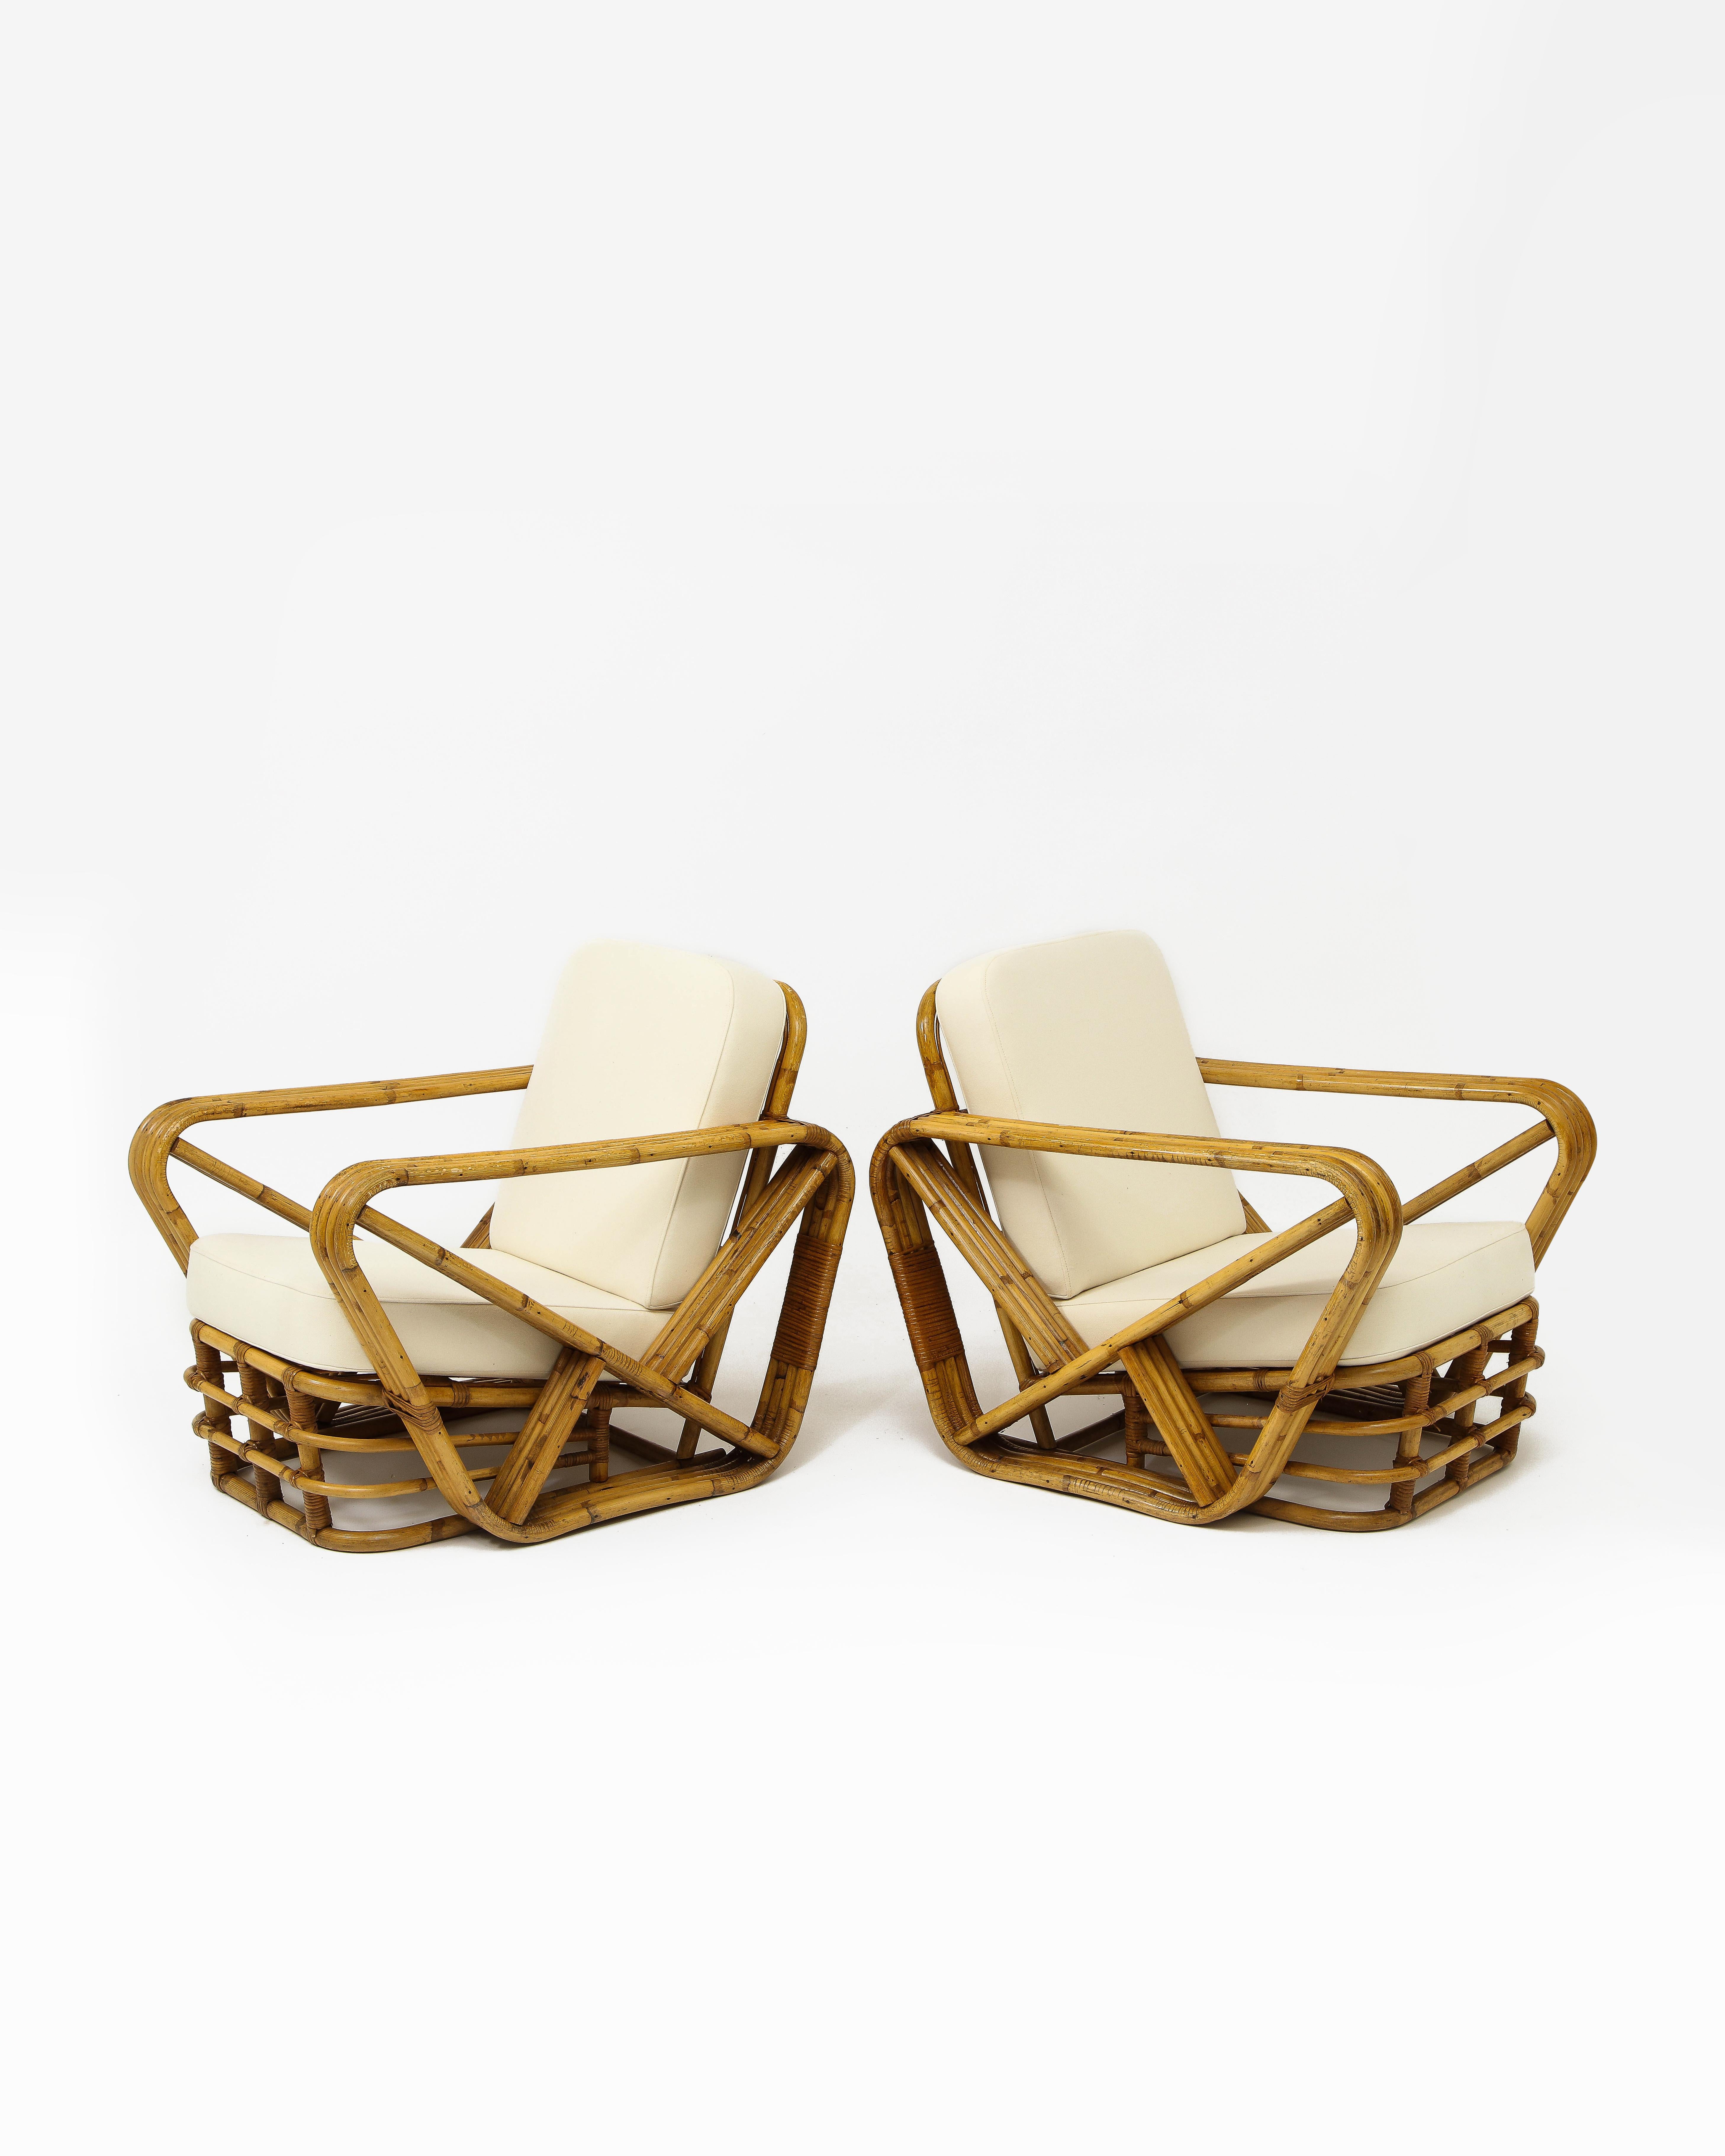 Mid-Century Modern Pair of Paul Frankl Style Rattan Lounge Chairs, France, 1950s